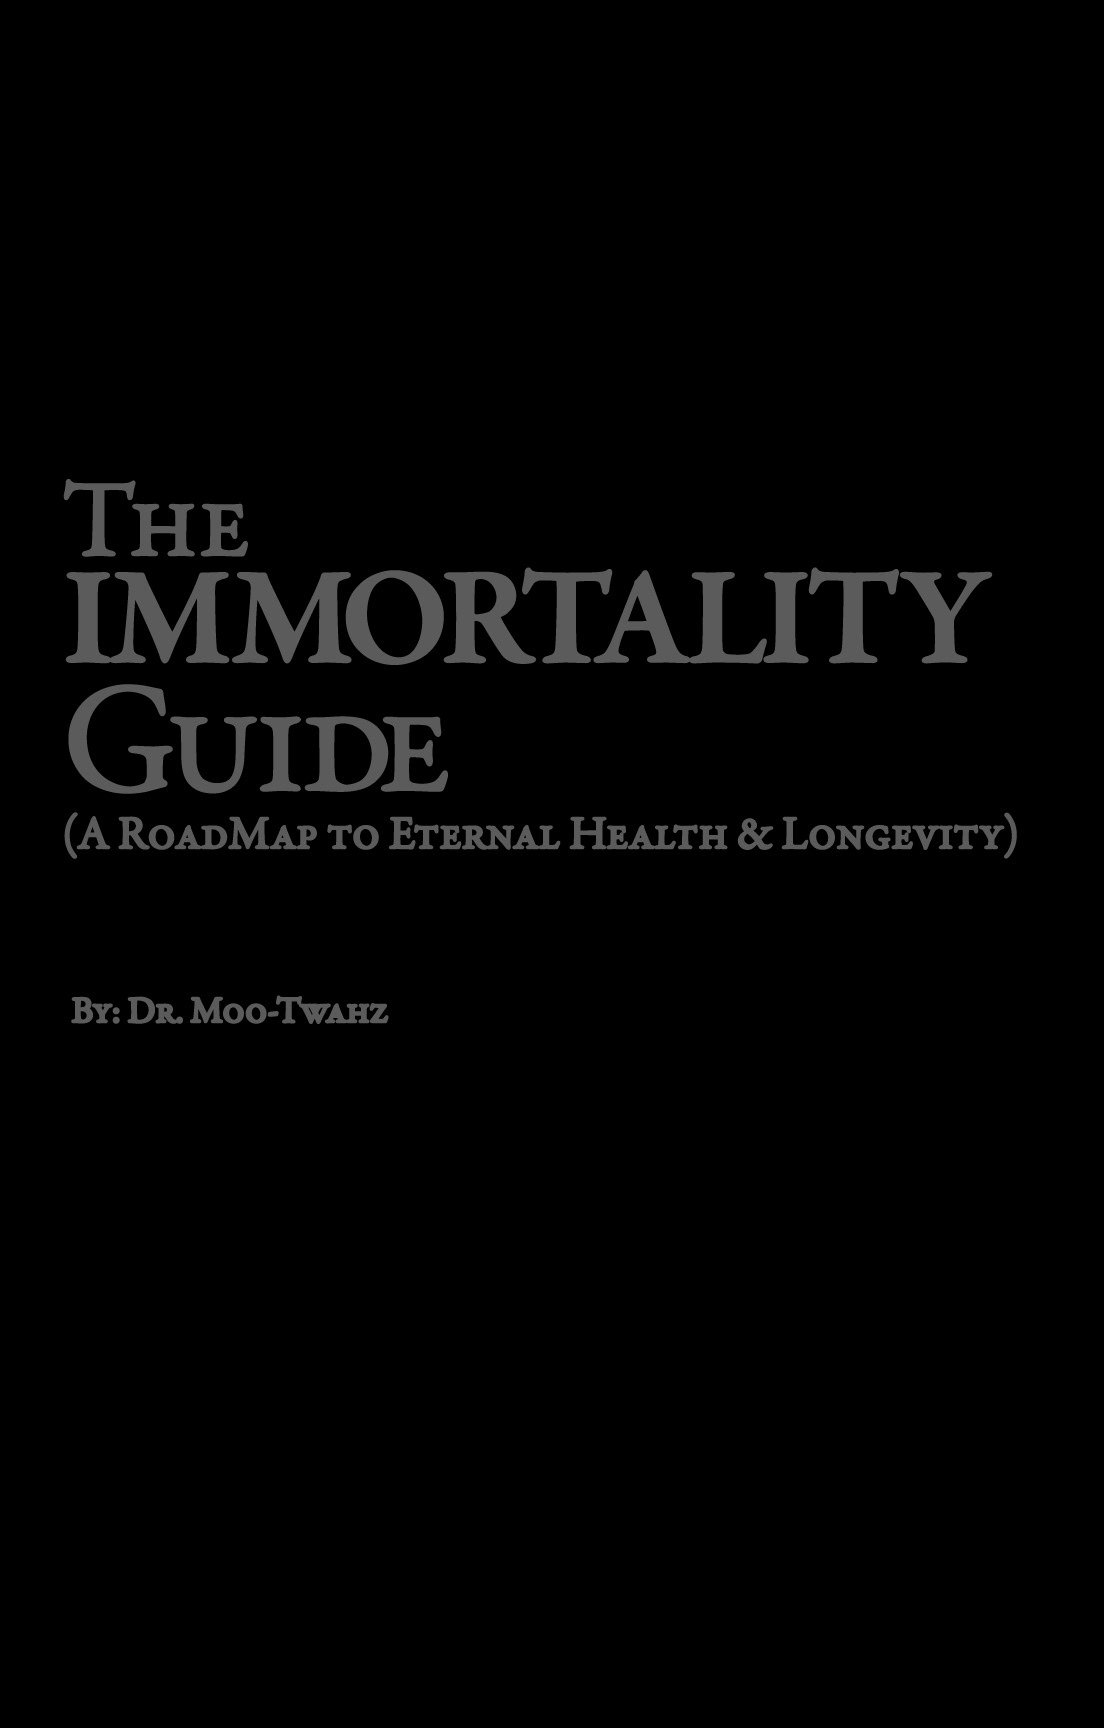 book cover book design type the immortality guide